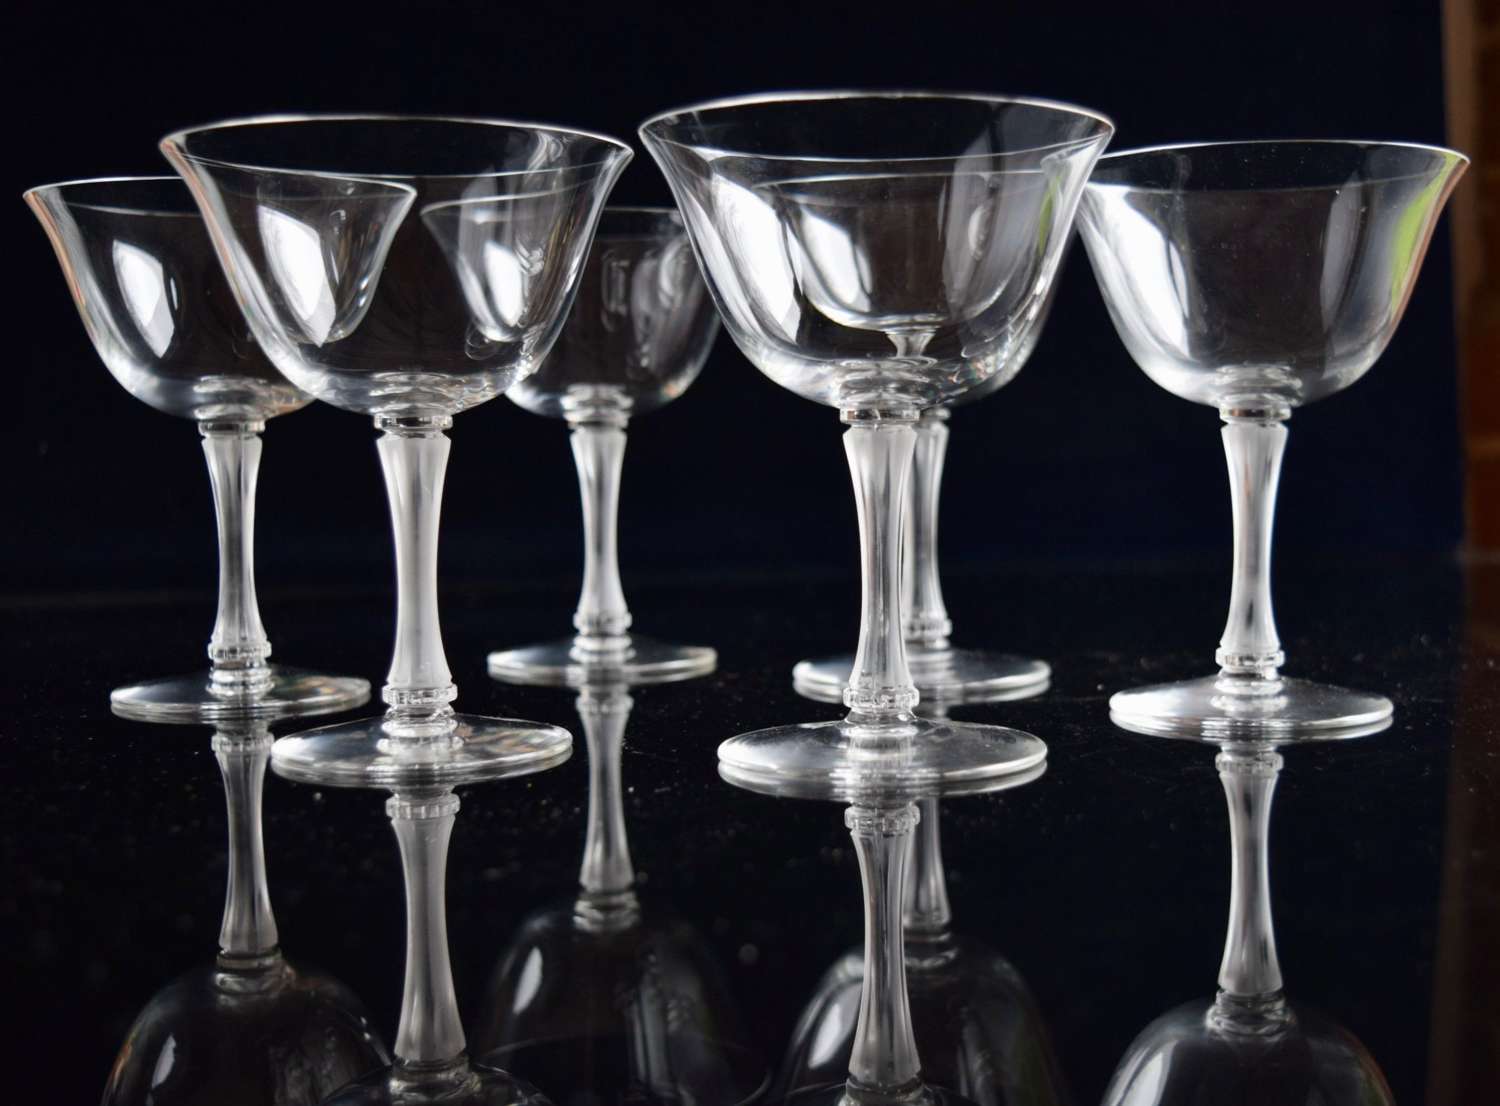 7 Lalique Champagne Glasses In The Barsac Pattern